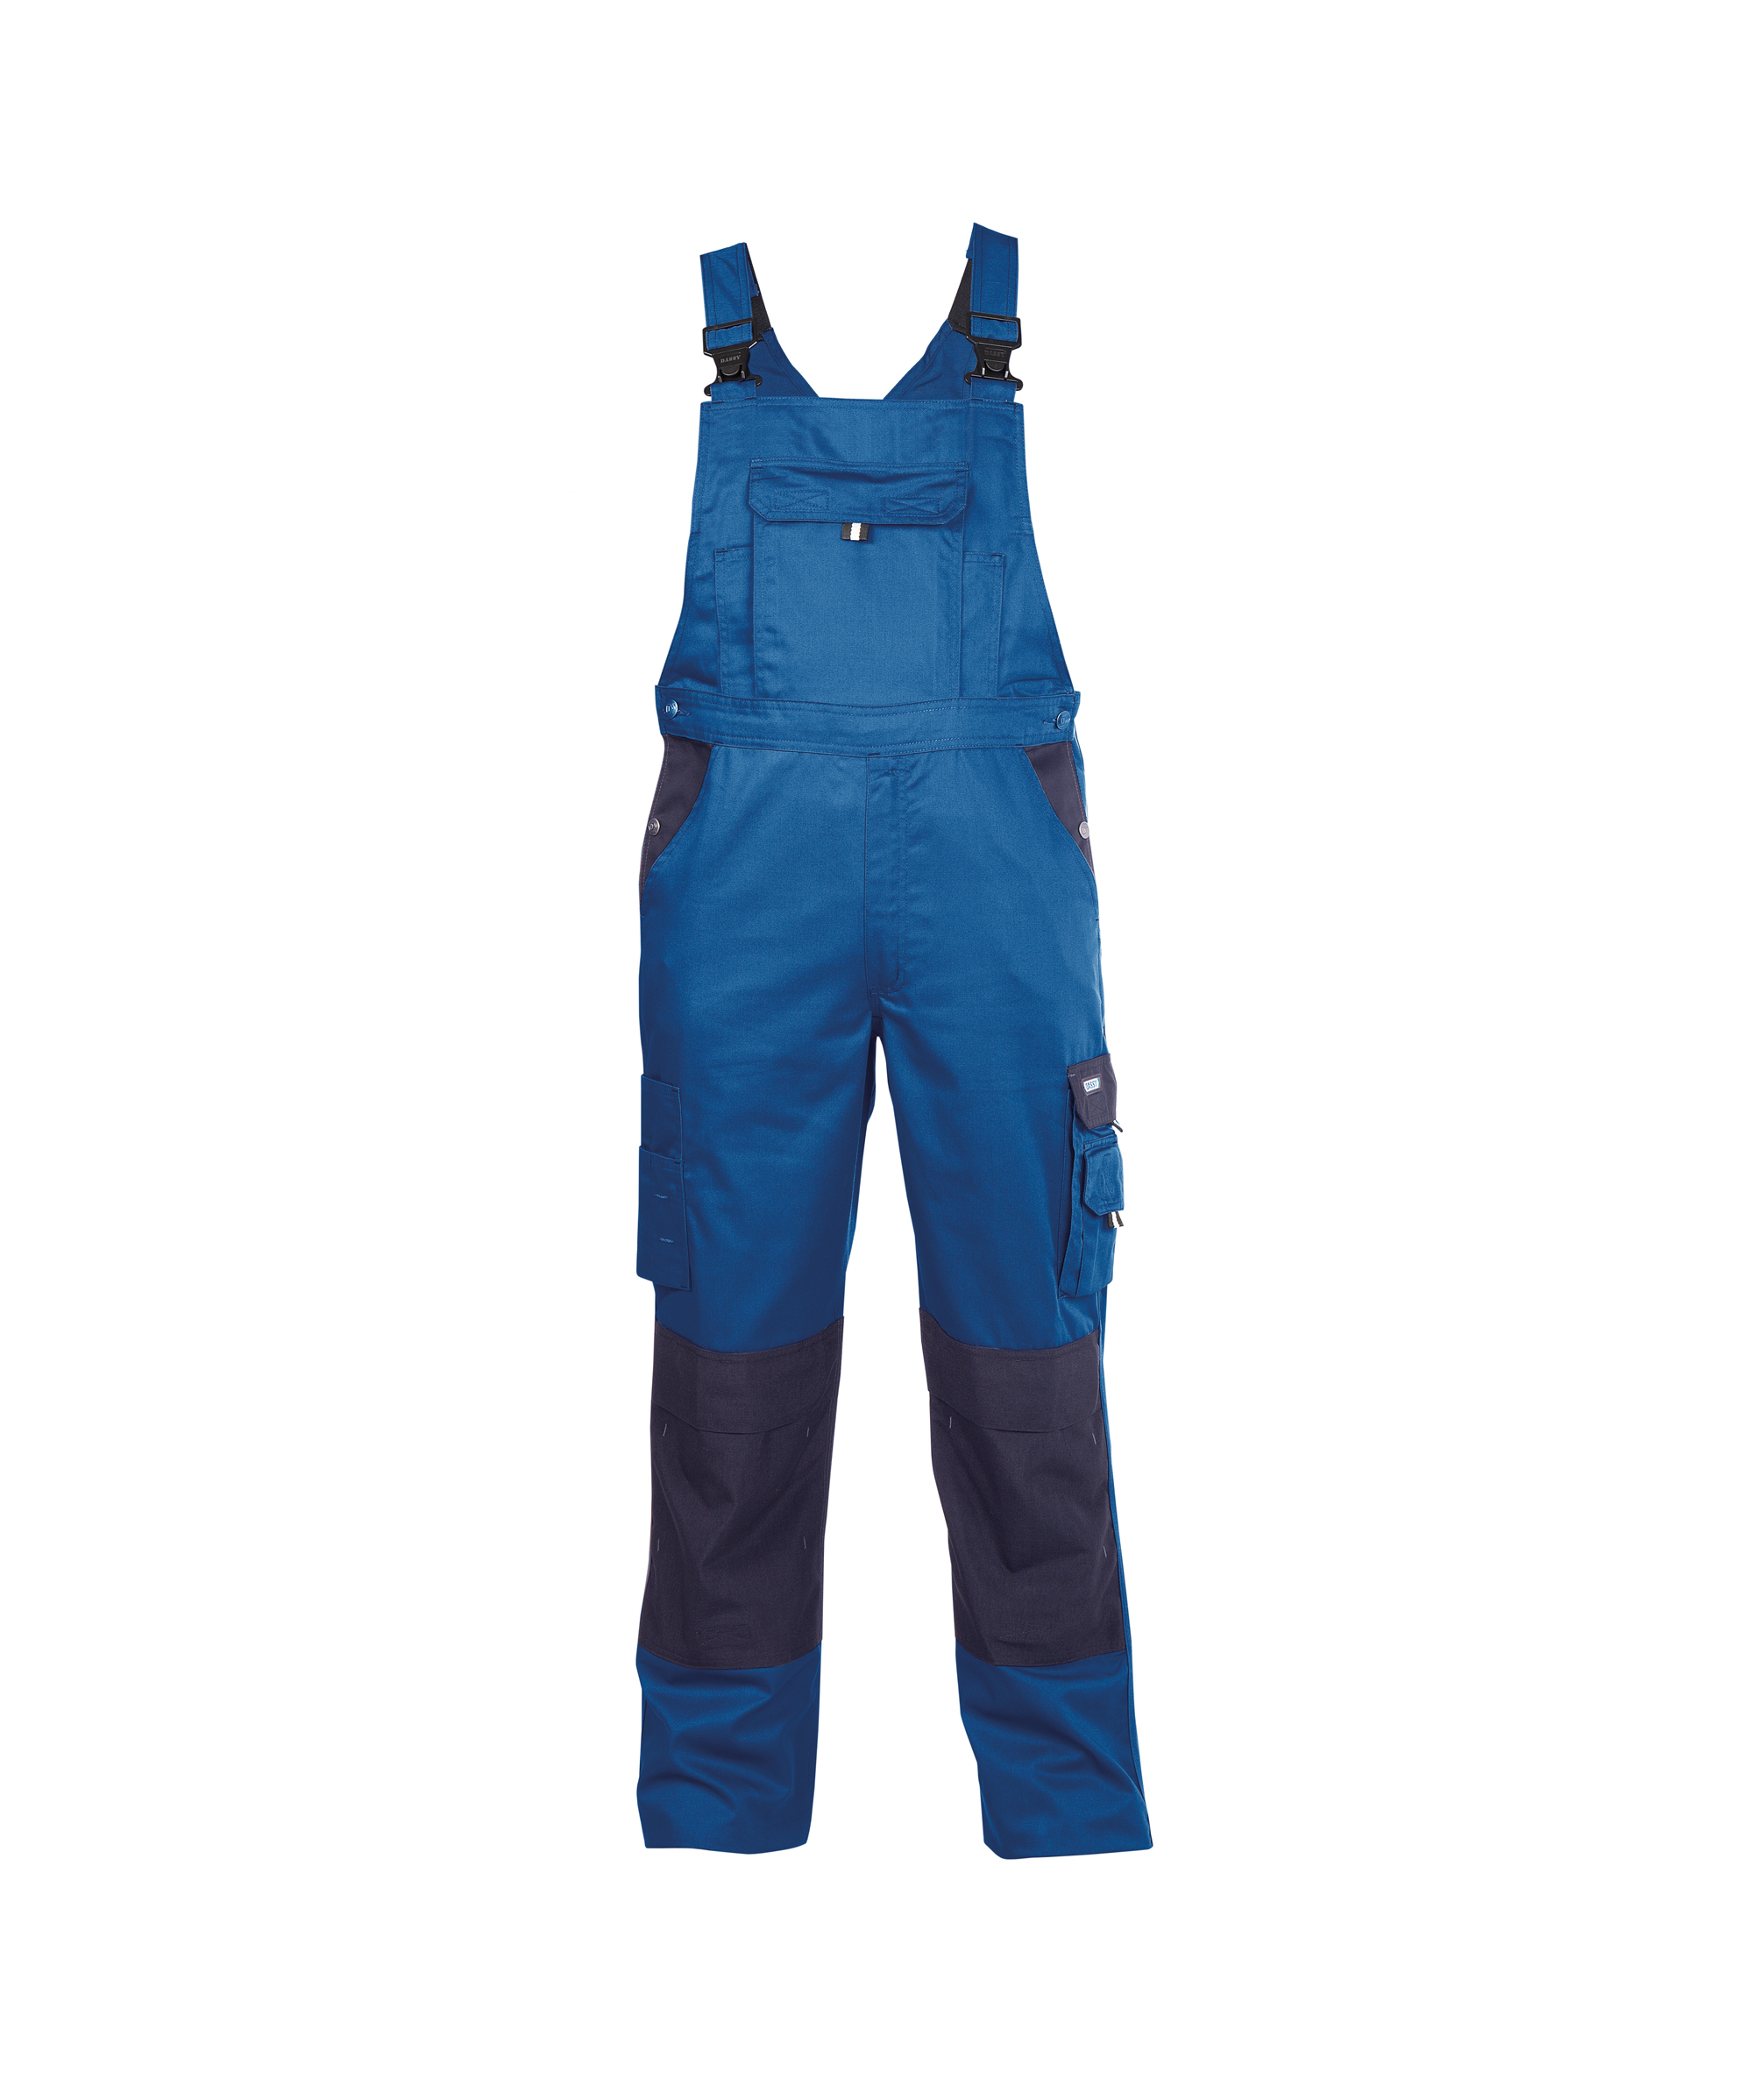 versailles_two-tone-brace-overall-with-knee-pockets_royal-blue-navy_front.jpg